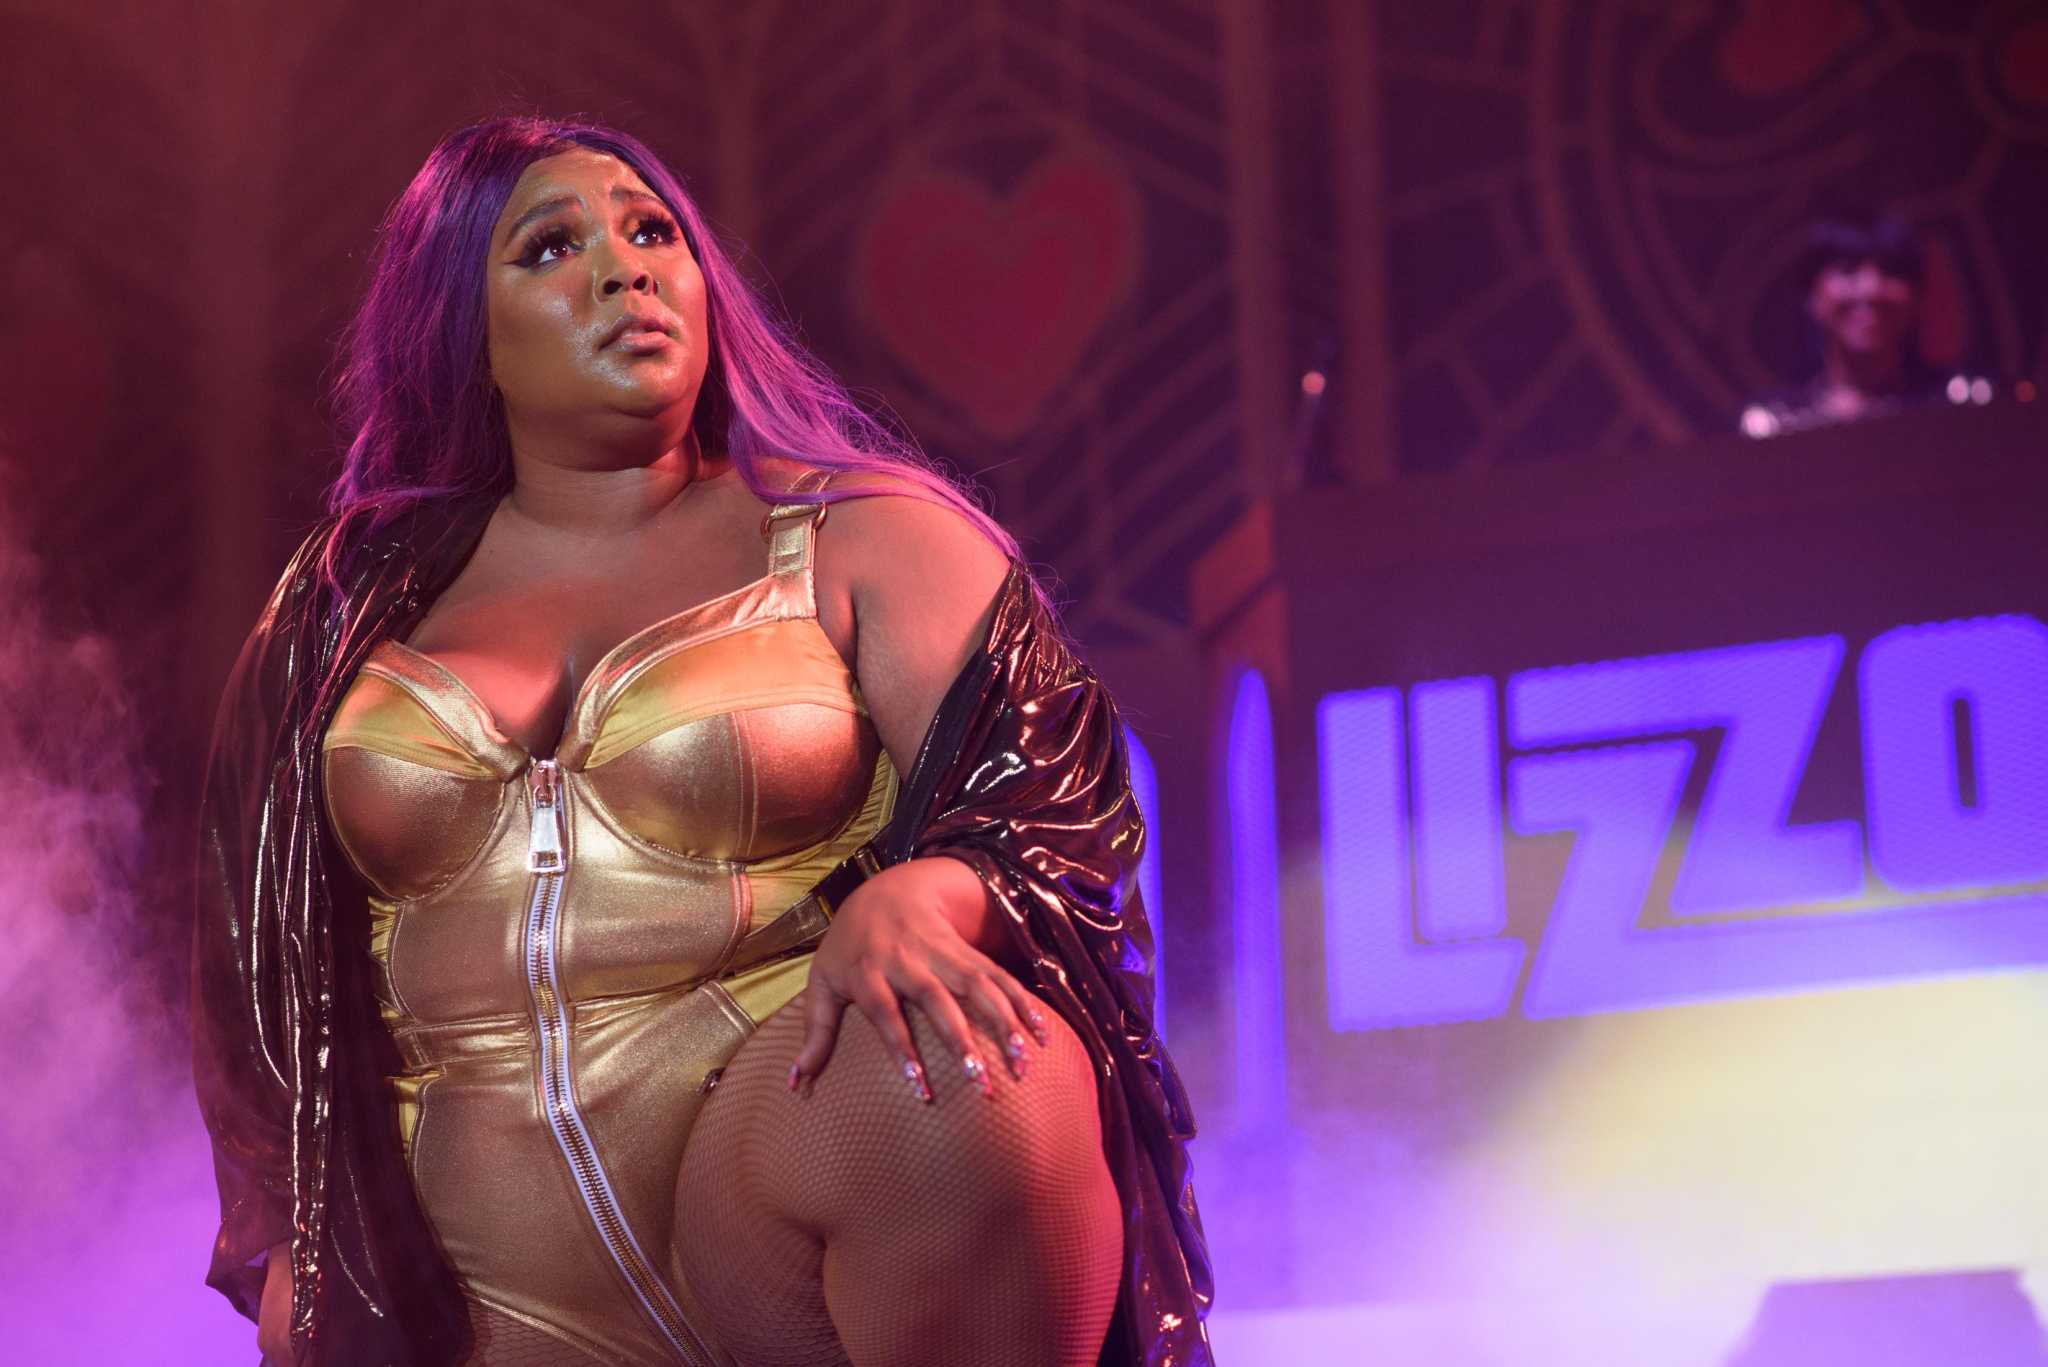 March 13: Lizzo has everyone talking at RodeoHouston.